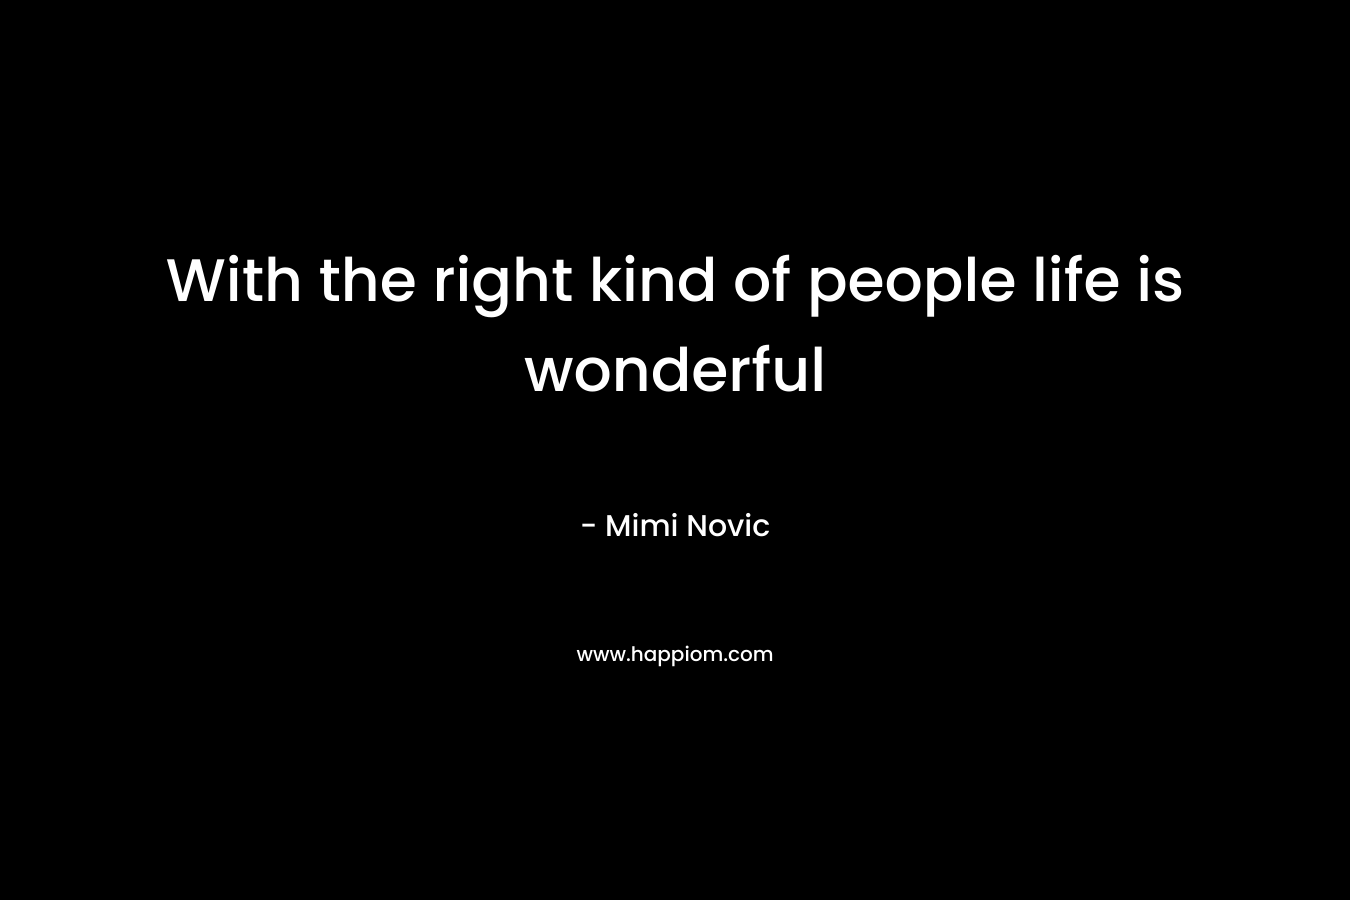 With the right kind of people life is wonderful – Mimi Novic